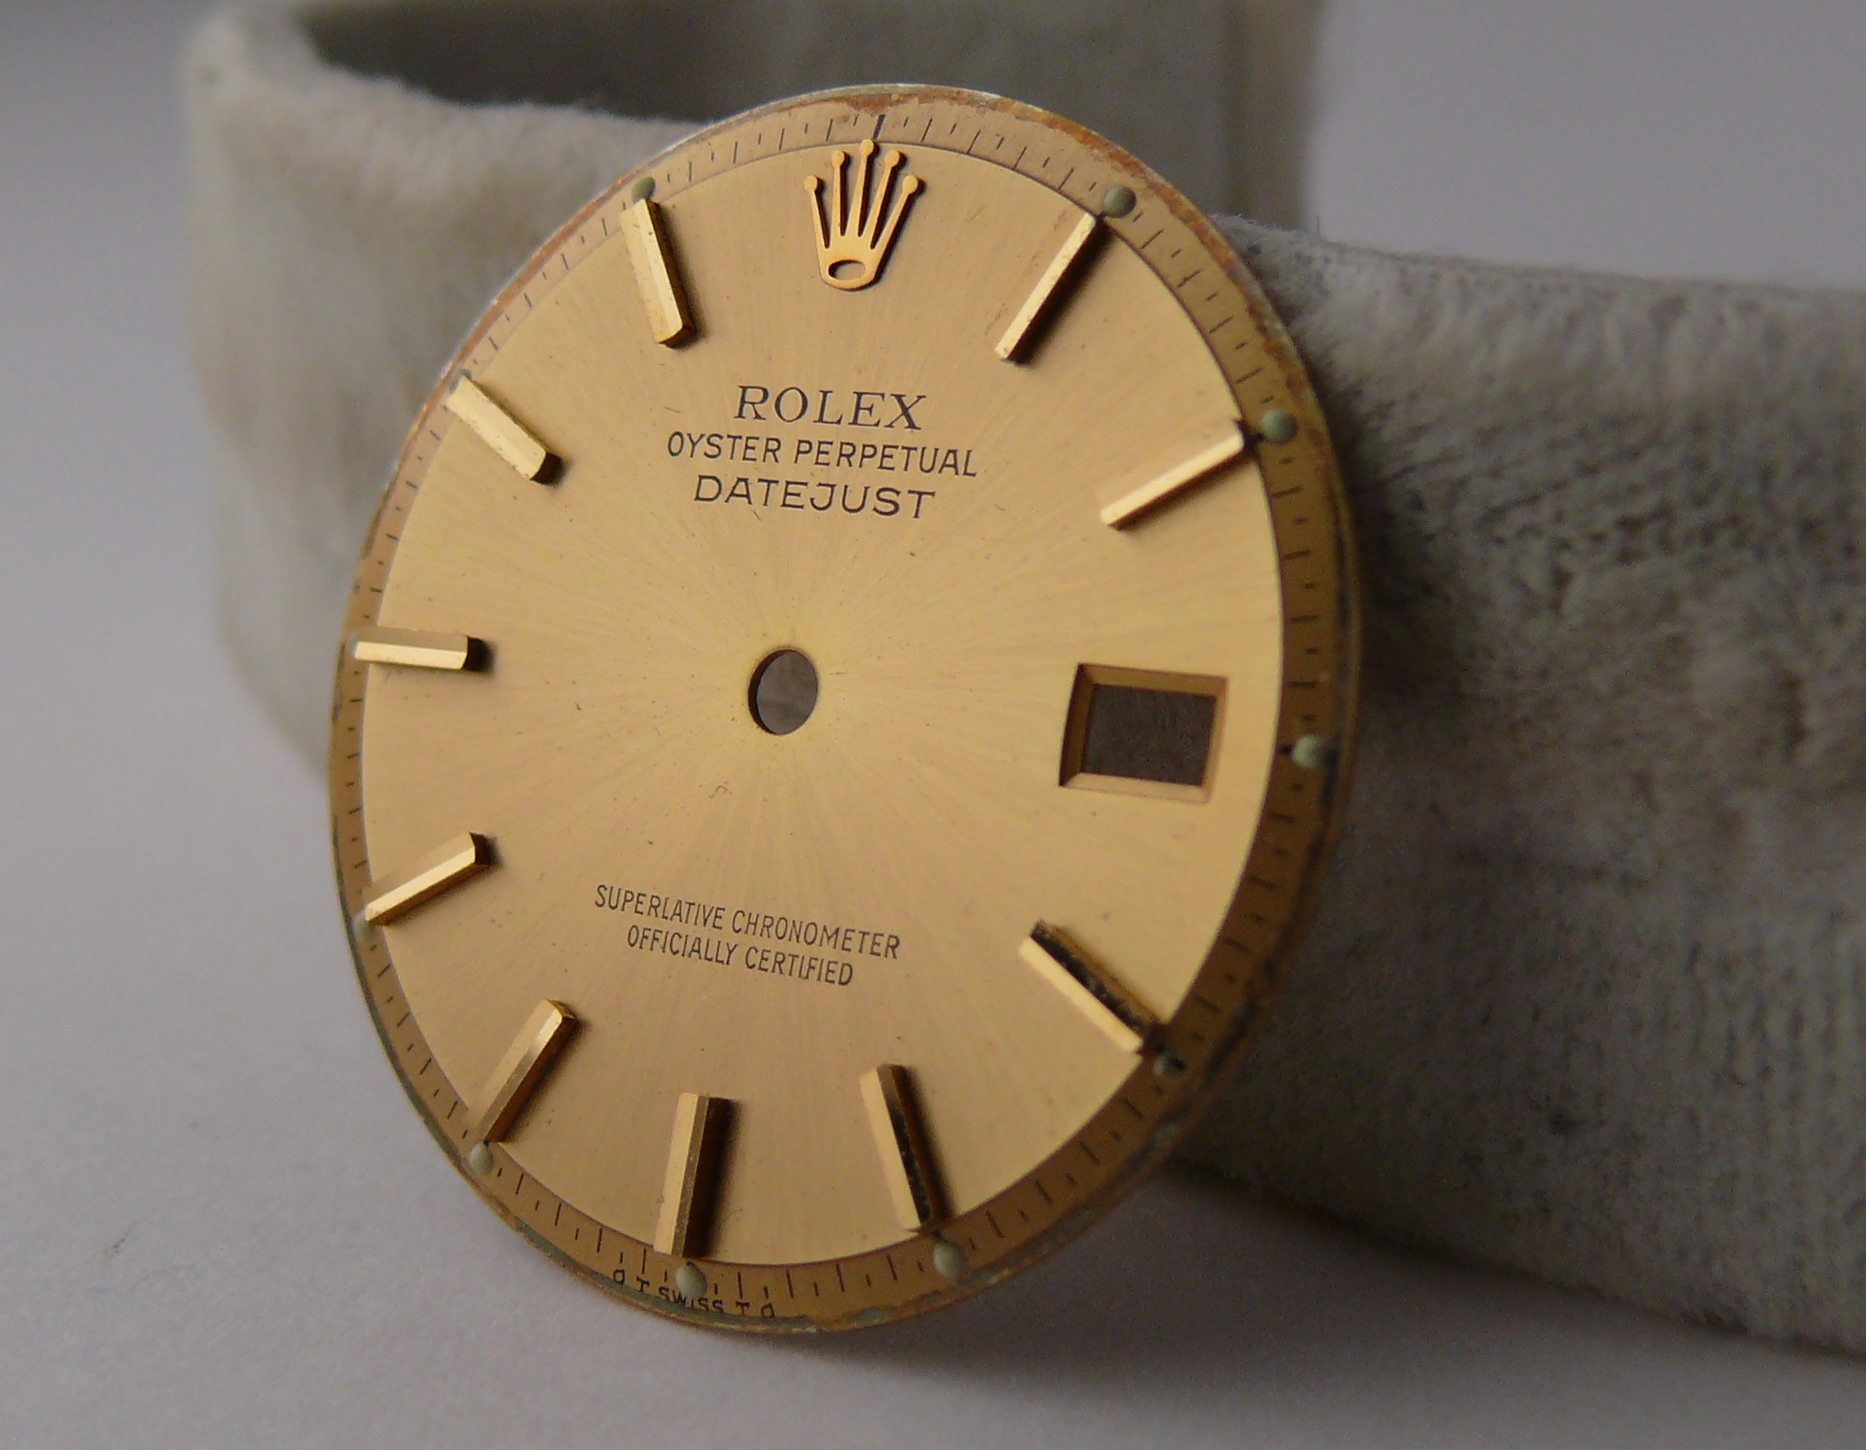 Vintage Gents Rolex Oyster Perpetual Datejust Dial 16014 16030 16234 16220. Please note dial is in